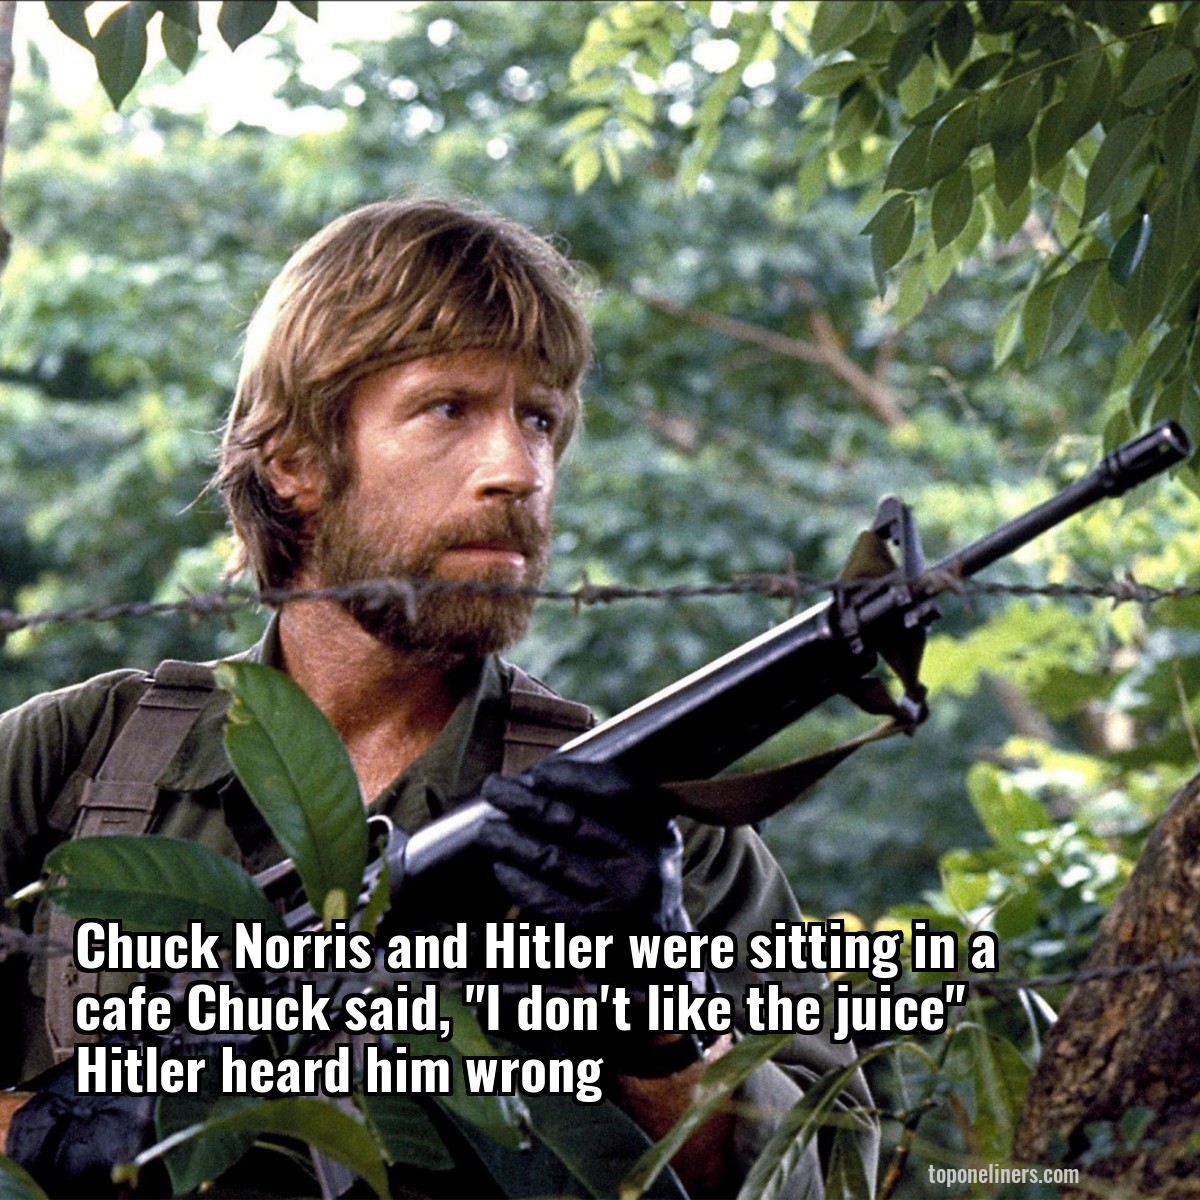 Chuck Norris and Hitler were sitting in a cafe Chuck said, "I don't like the juice" Hitler heard him wrong